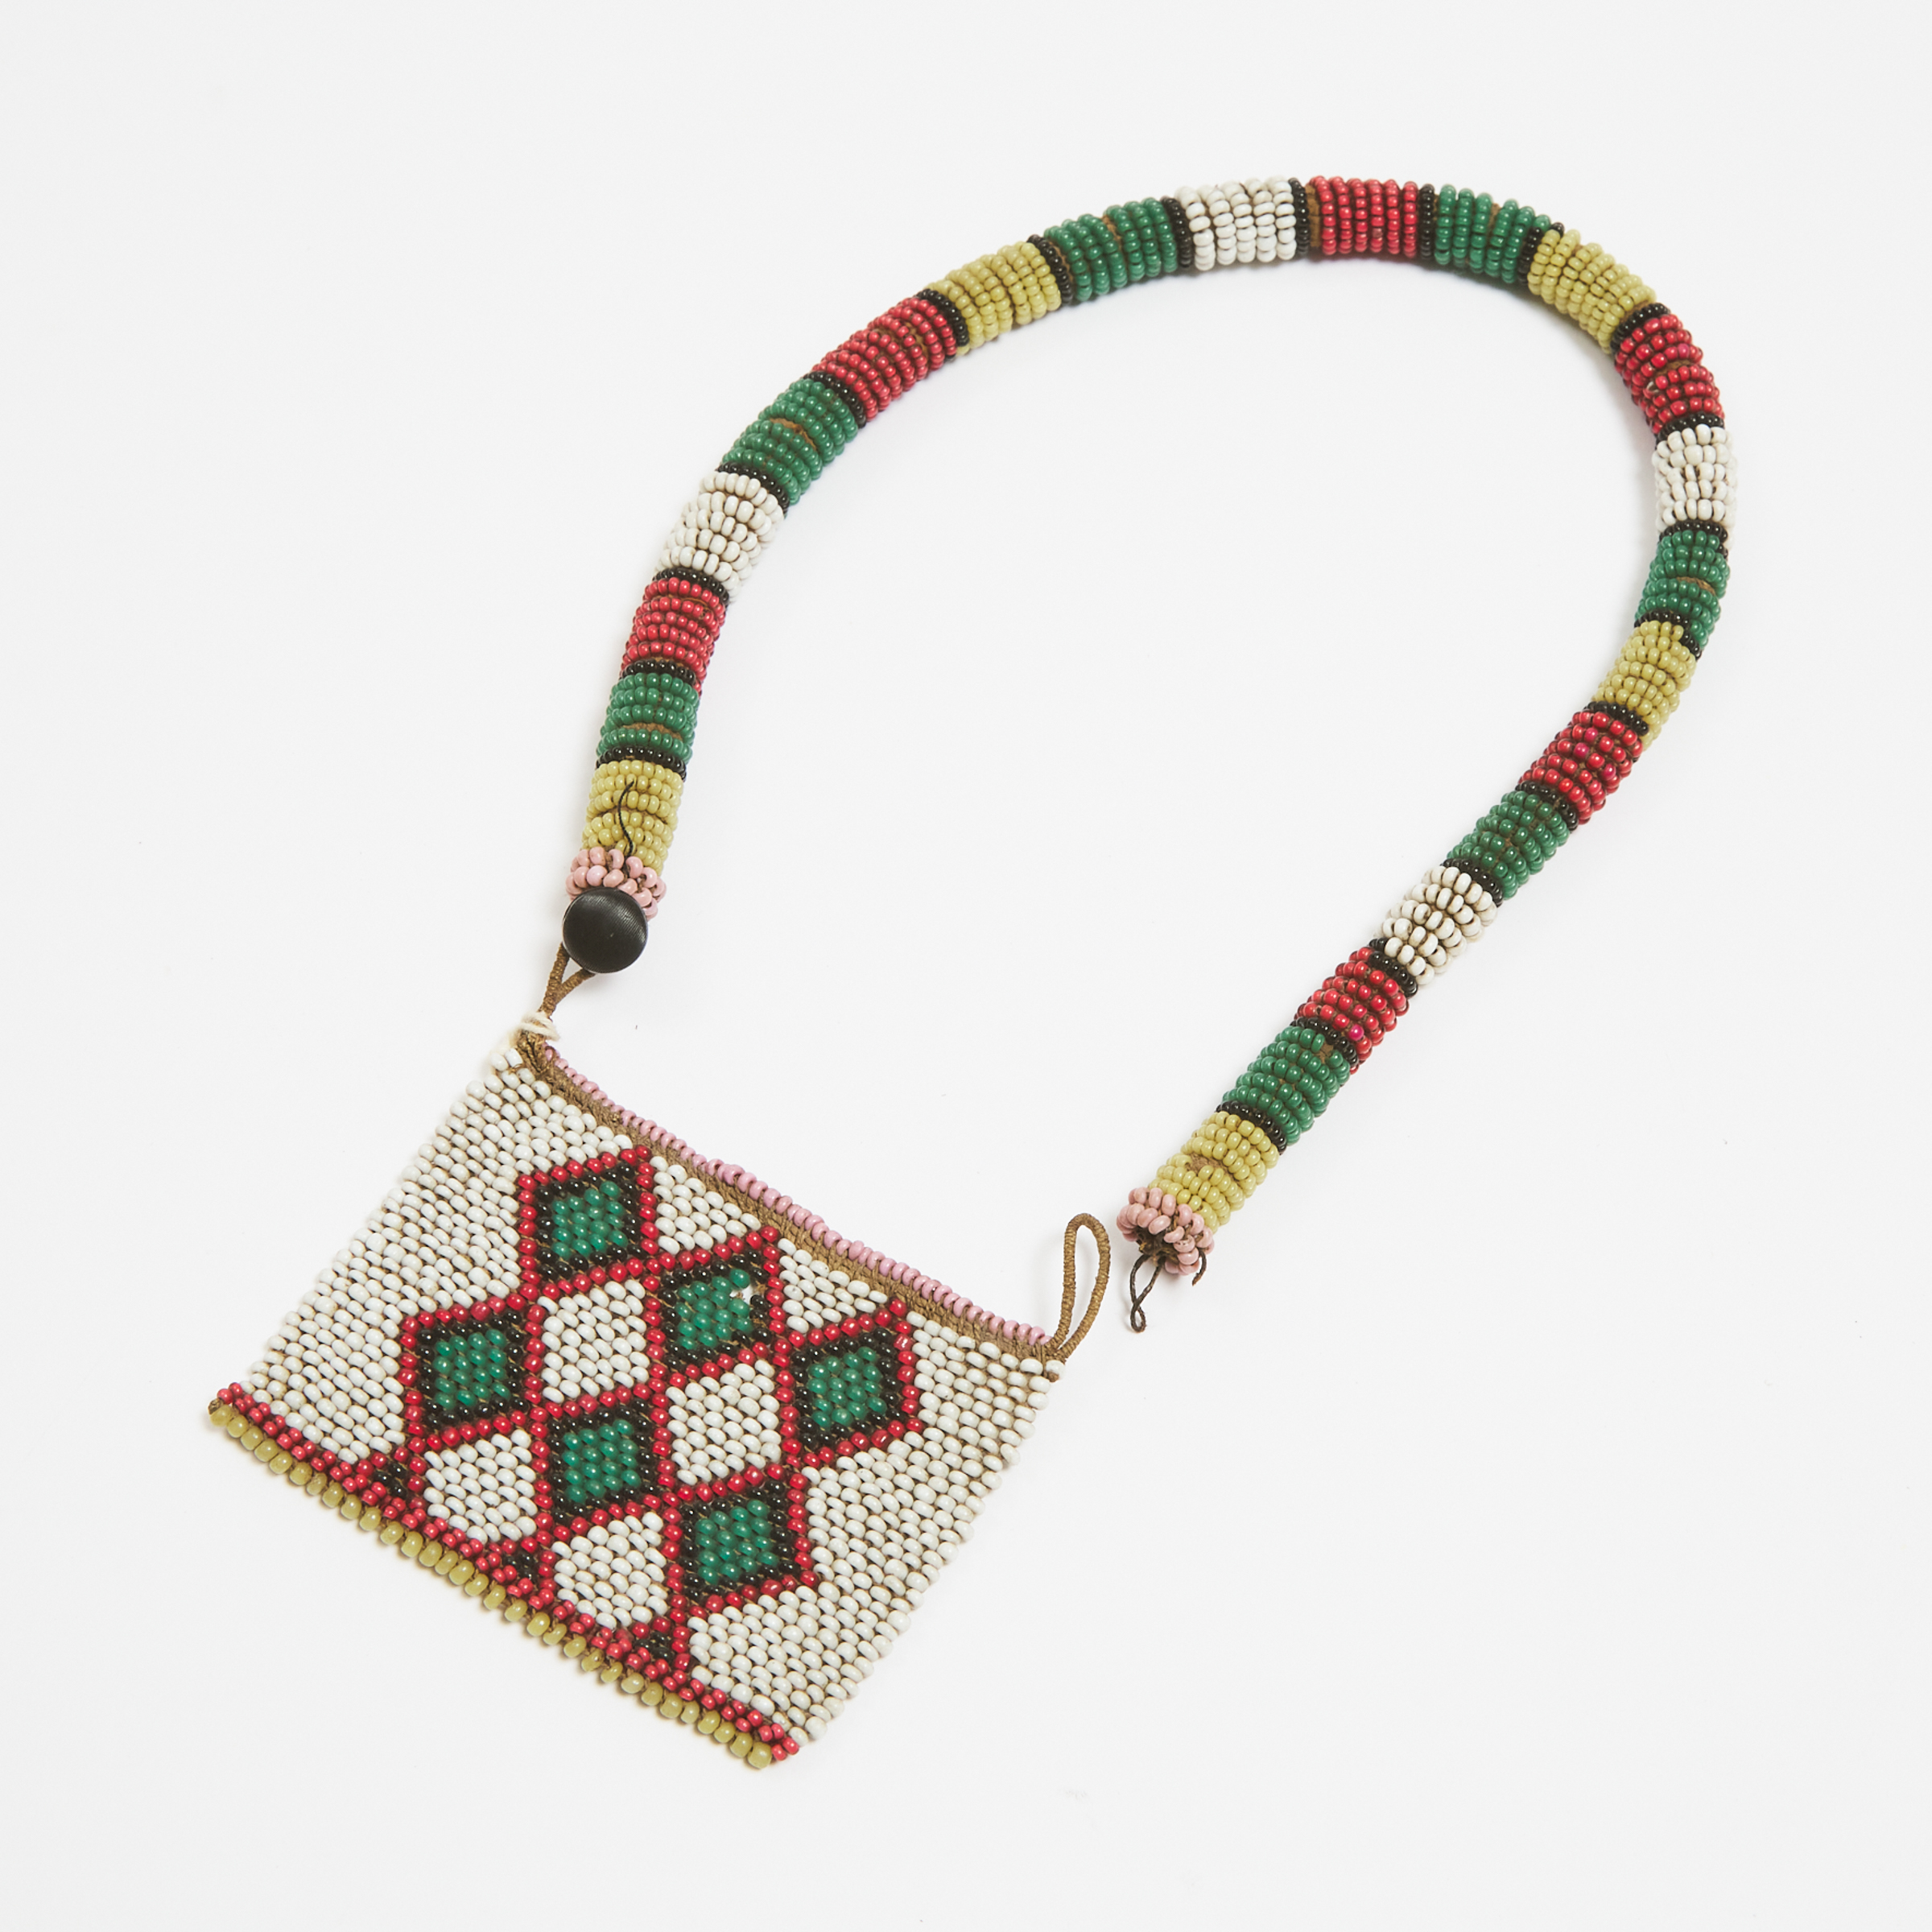 KwaZulu-Natal "Love Letter" Necklace, South Africa, mid 20th century